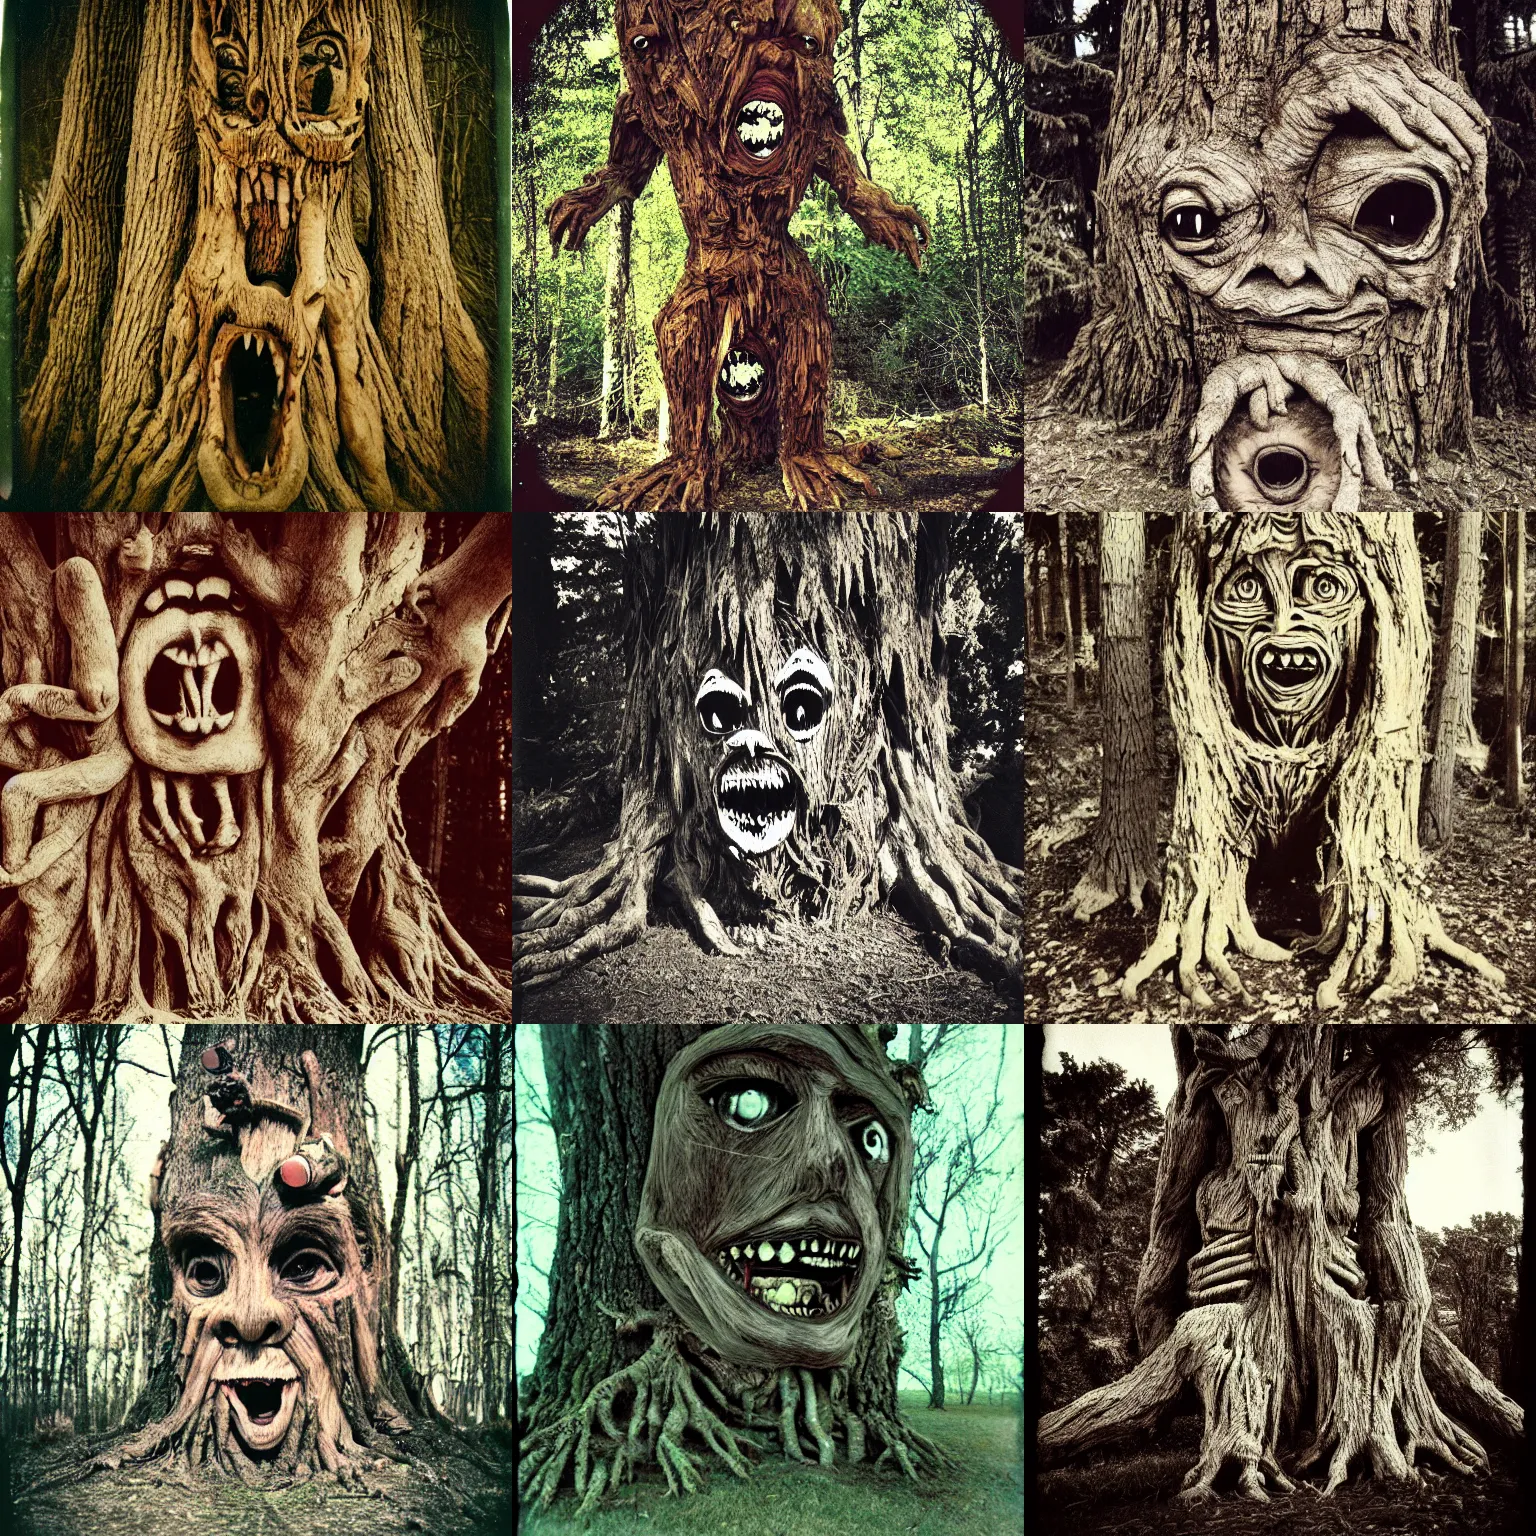 Prompt: a terrifying tree monster with distorted faces made of bark, lovecratftian horror, shot on expired instamatic film